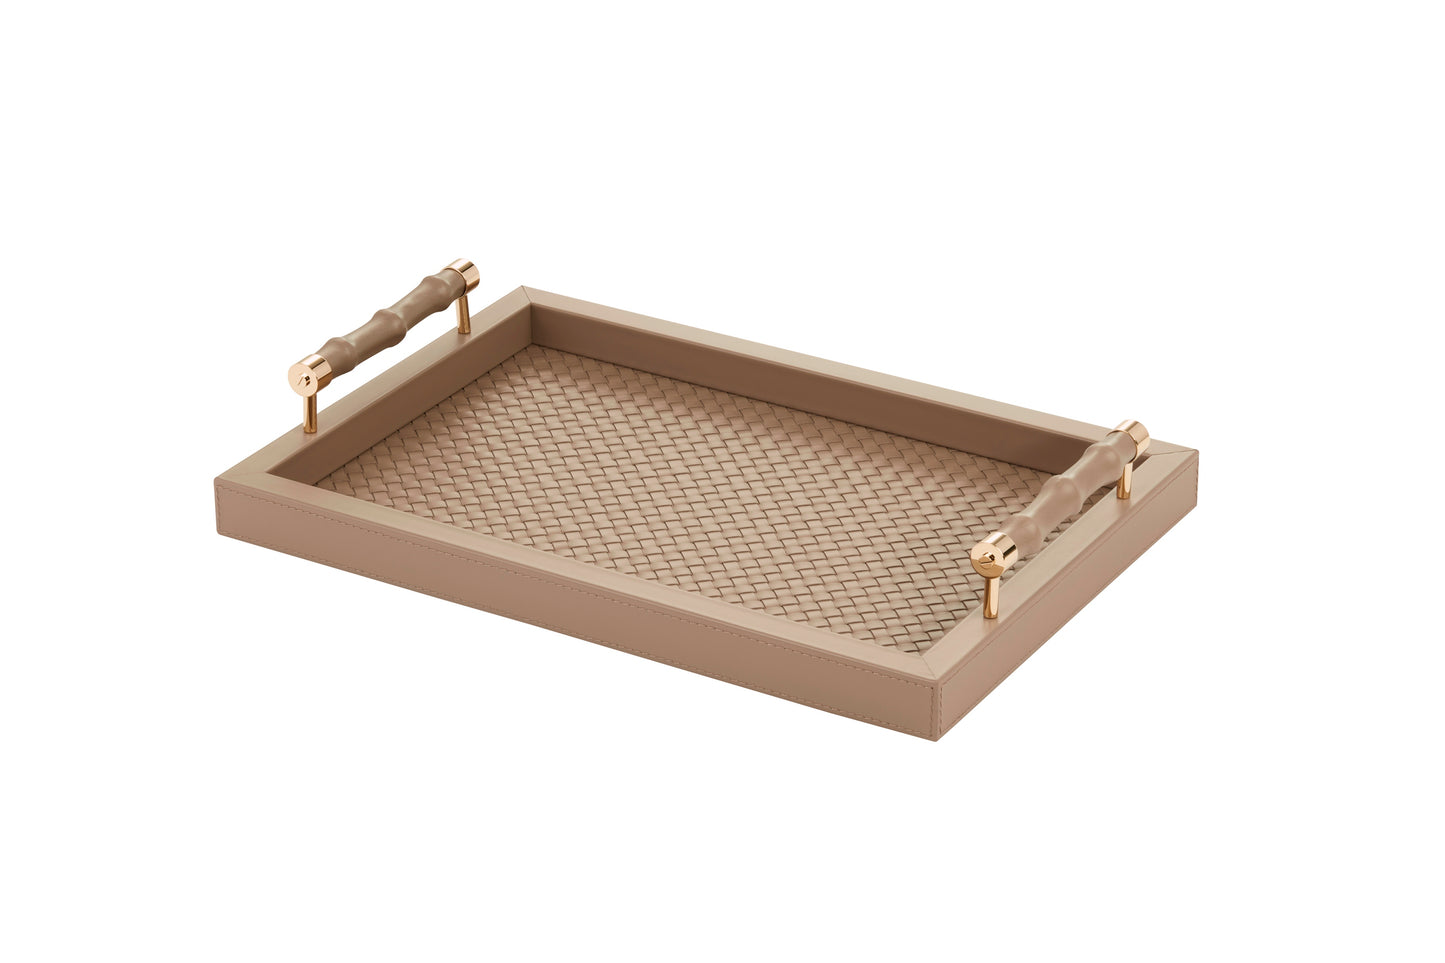 Lea Handwoven Tray by Riviere | Leather tray with handwoven leather lining and leather-covered bamboo handles. | Home Decor and Serveware | 2Jour Concierge, your luxury lifestyle shop